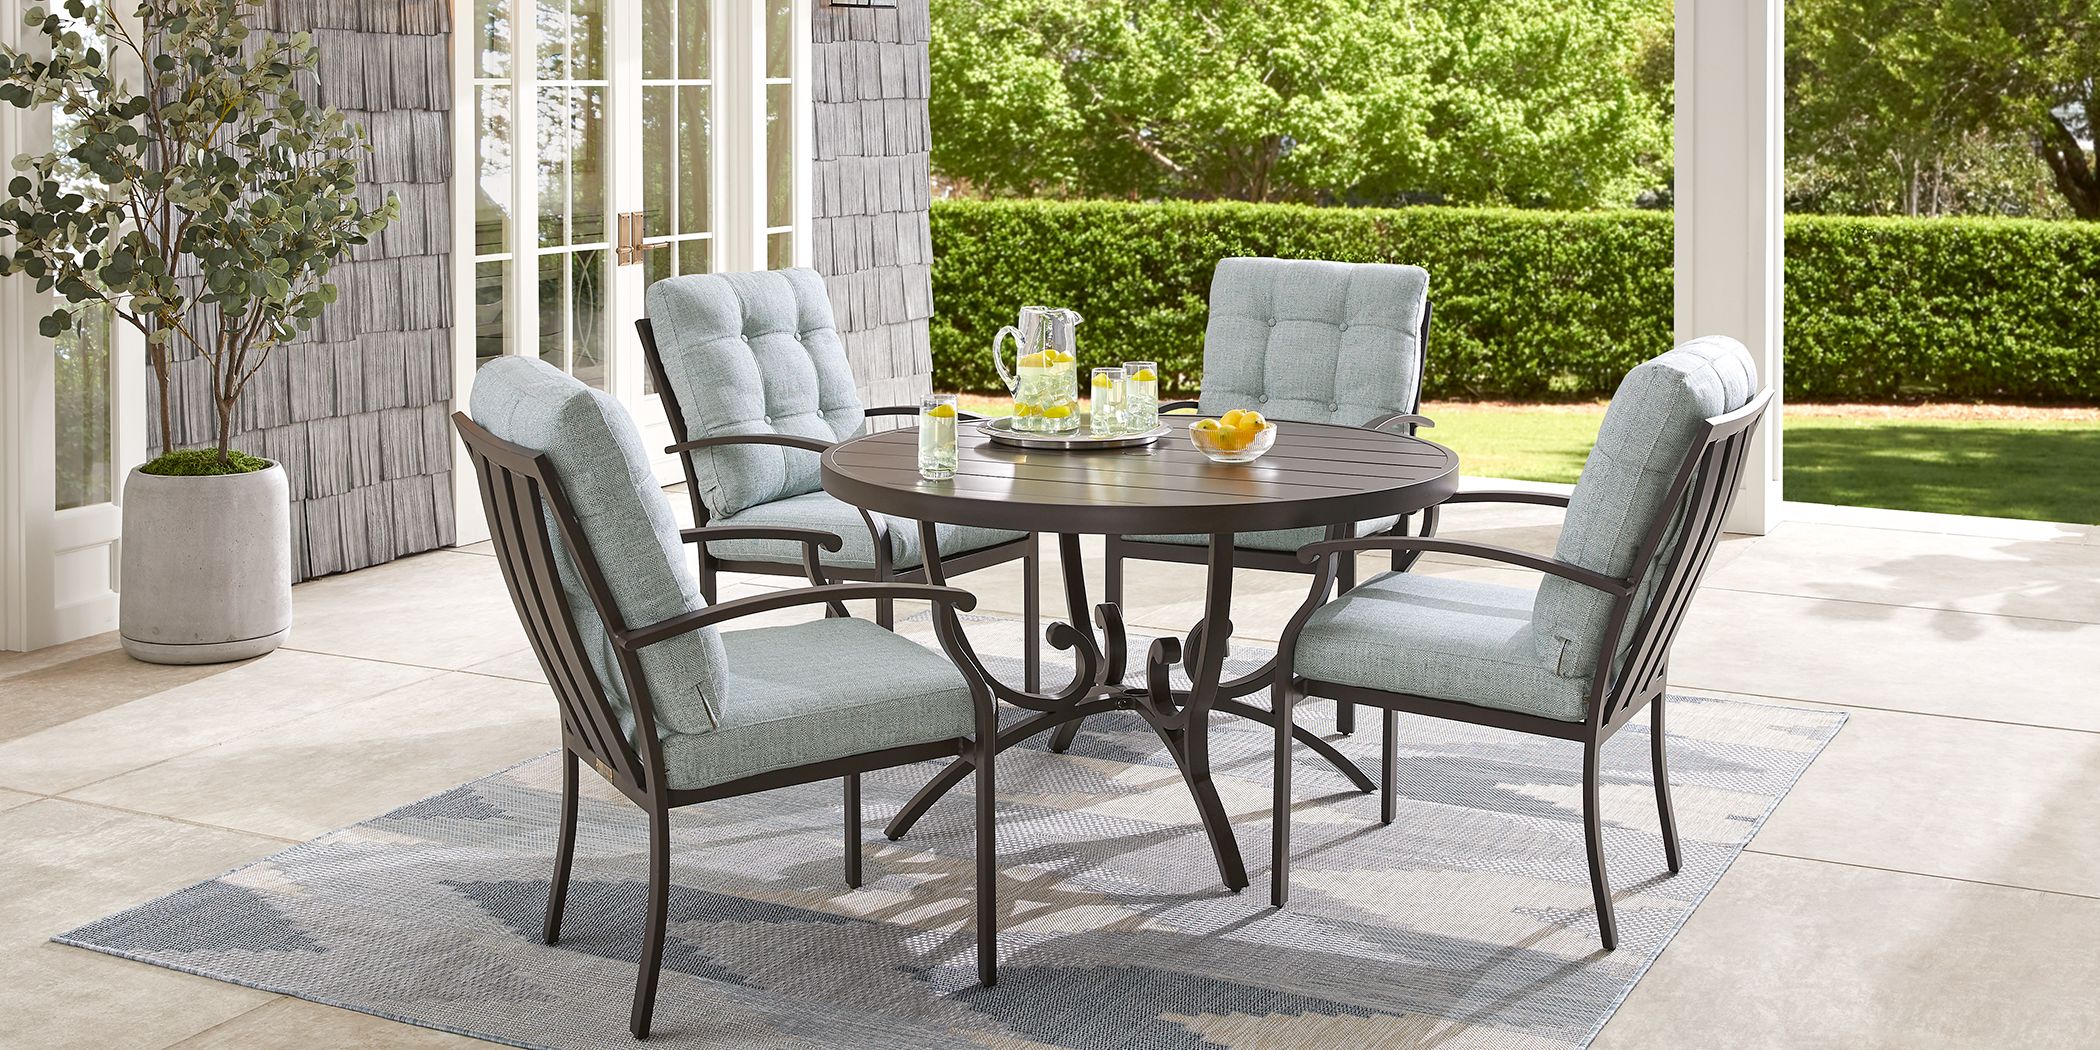 Round Outdoor Patio Dining Sets, Small Round Outdoor Dining Table And Chairs